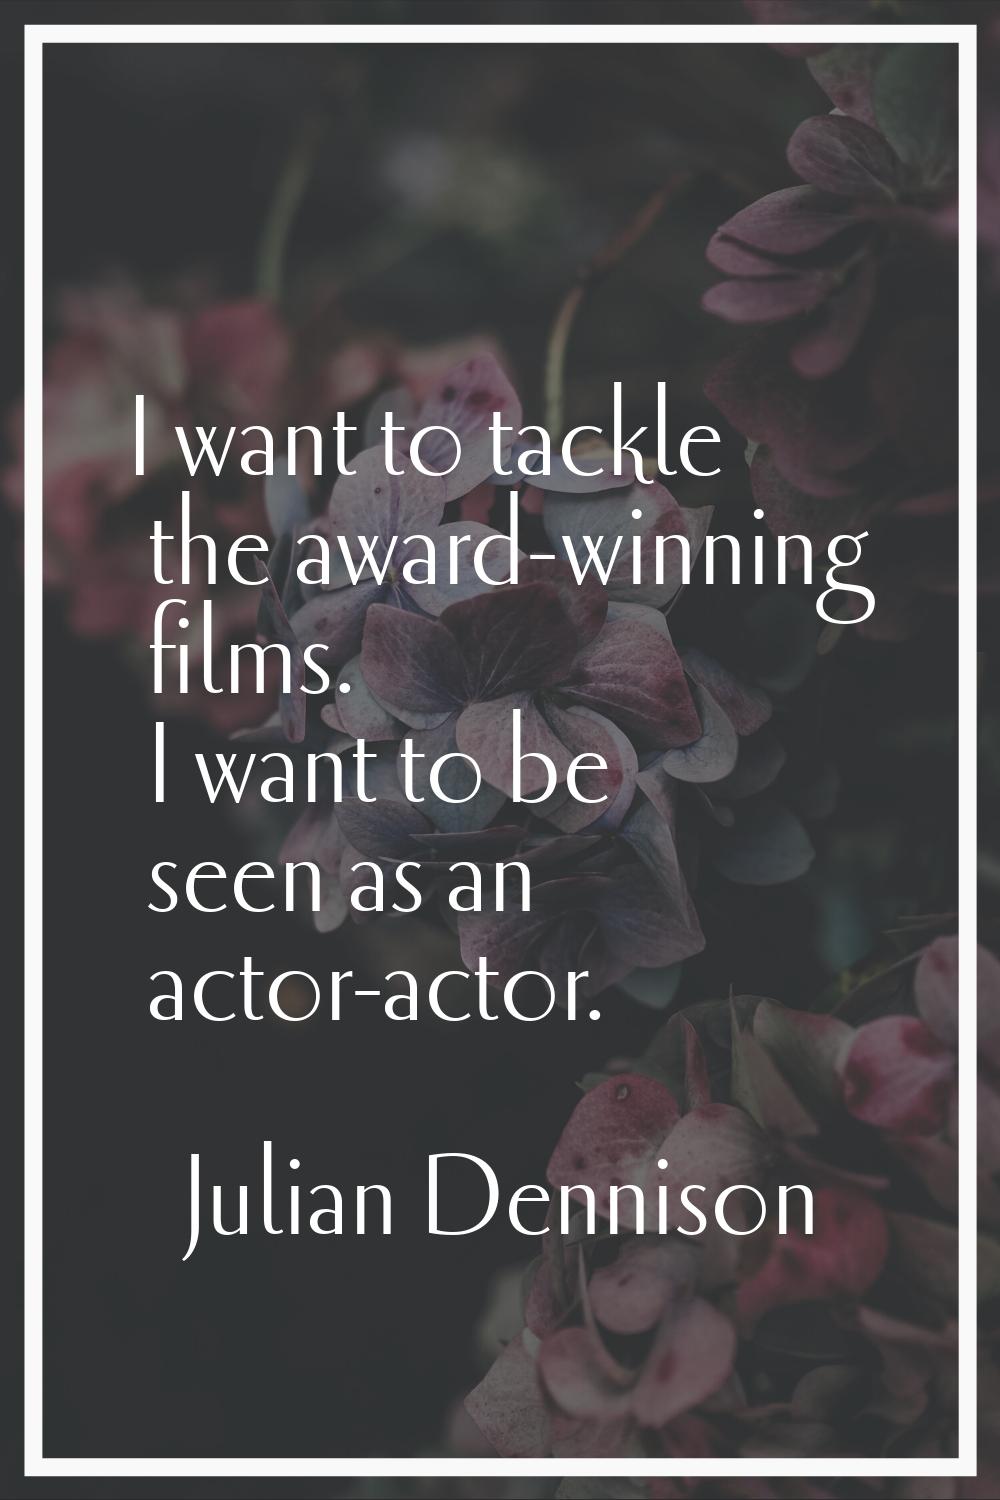 I want to tackle the award-winning films. I want to be seen as an actor-actor.